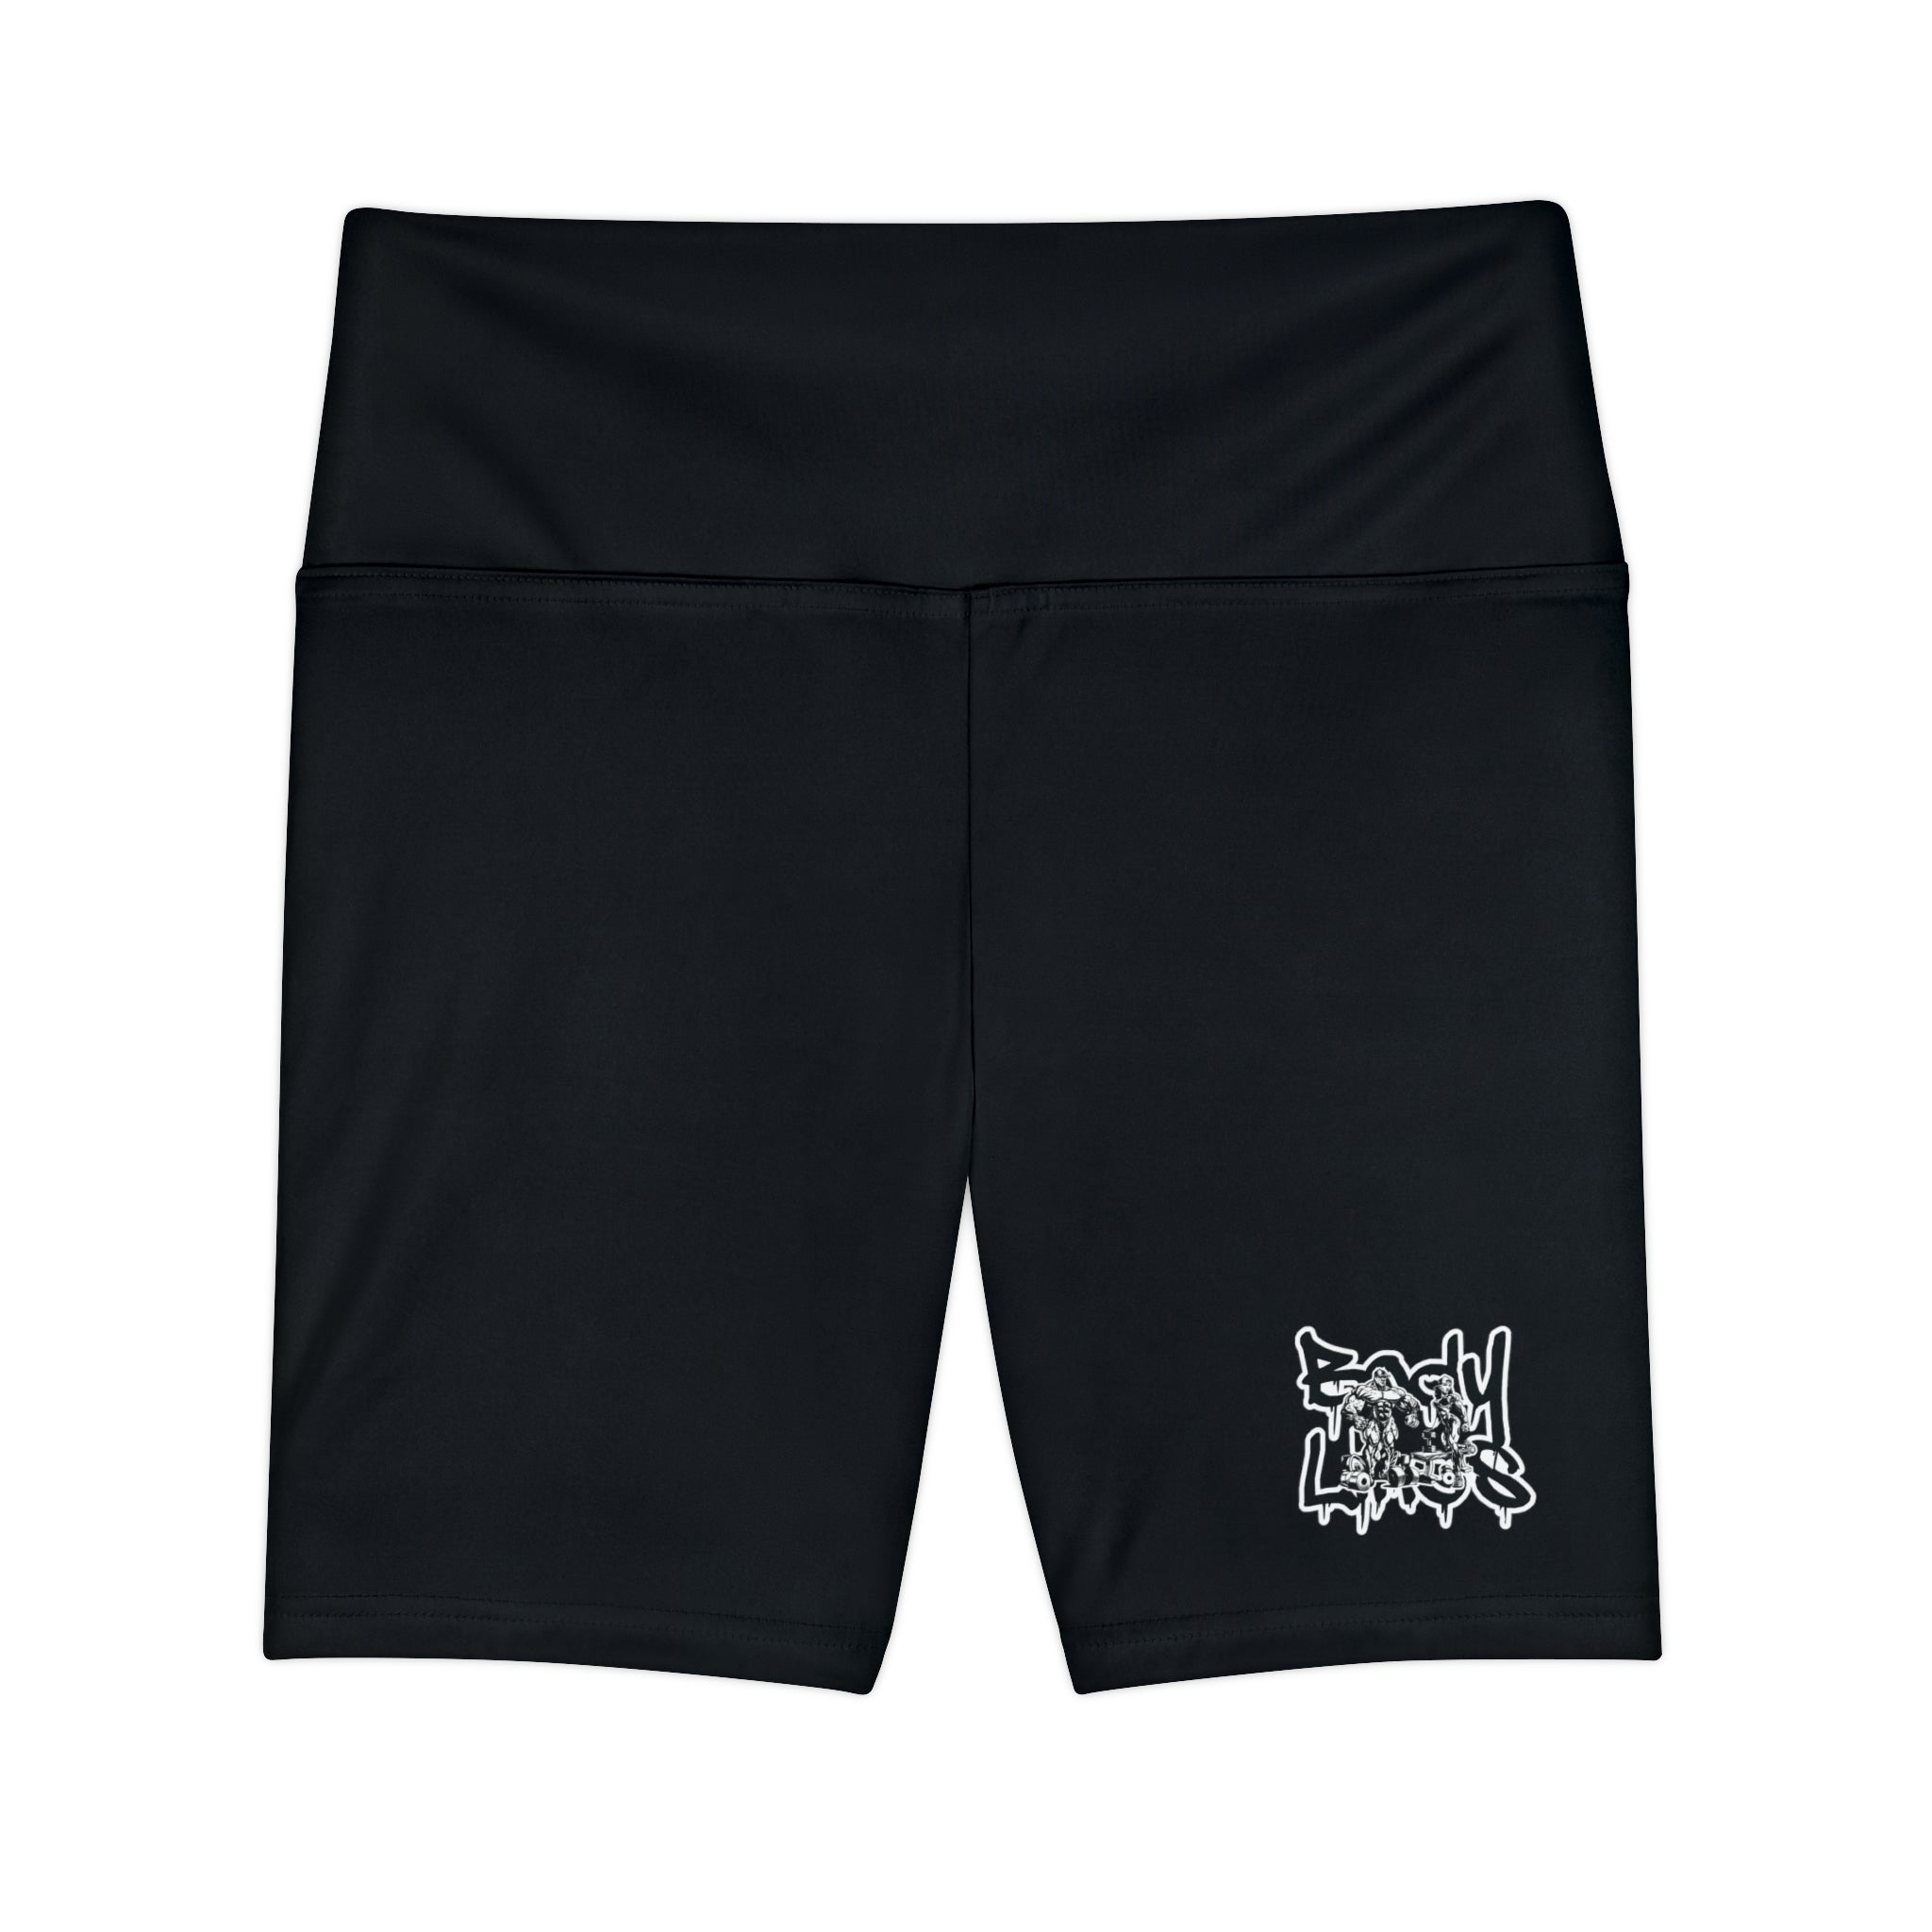 Body Lines - Women's Workout Shorts